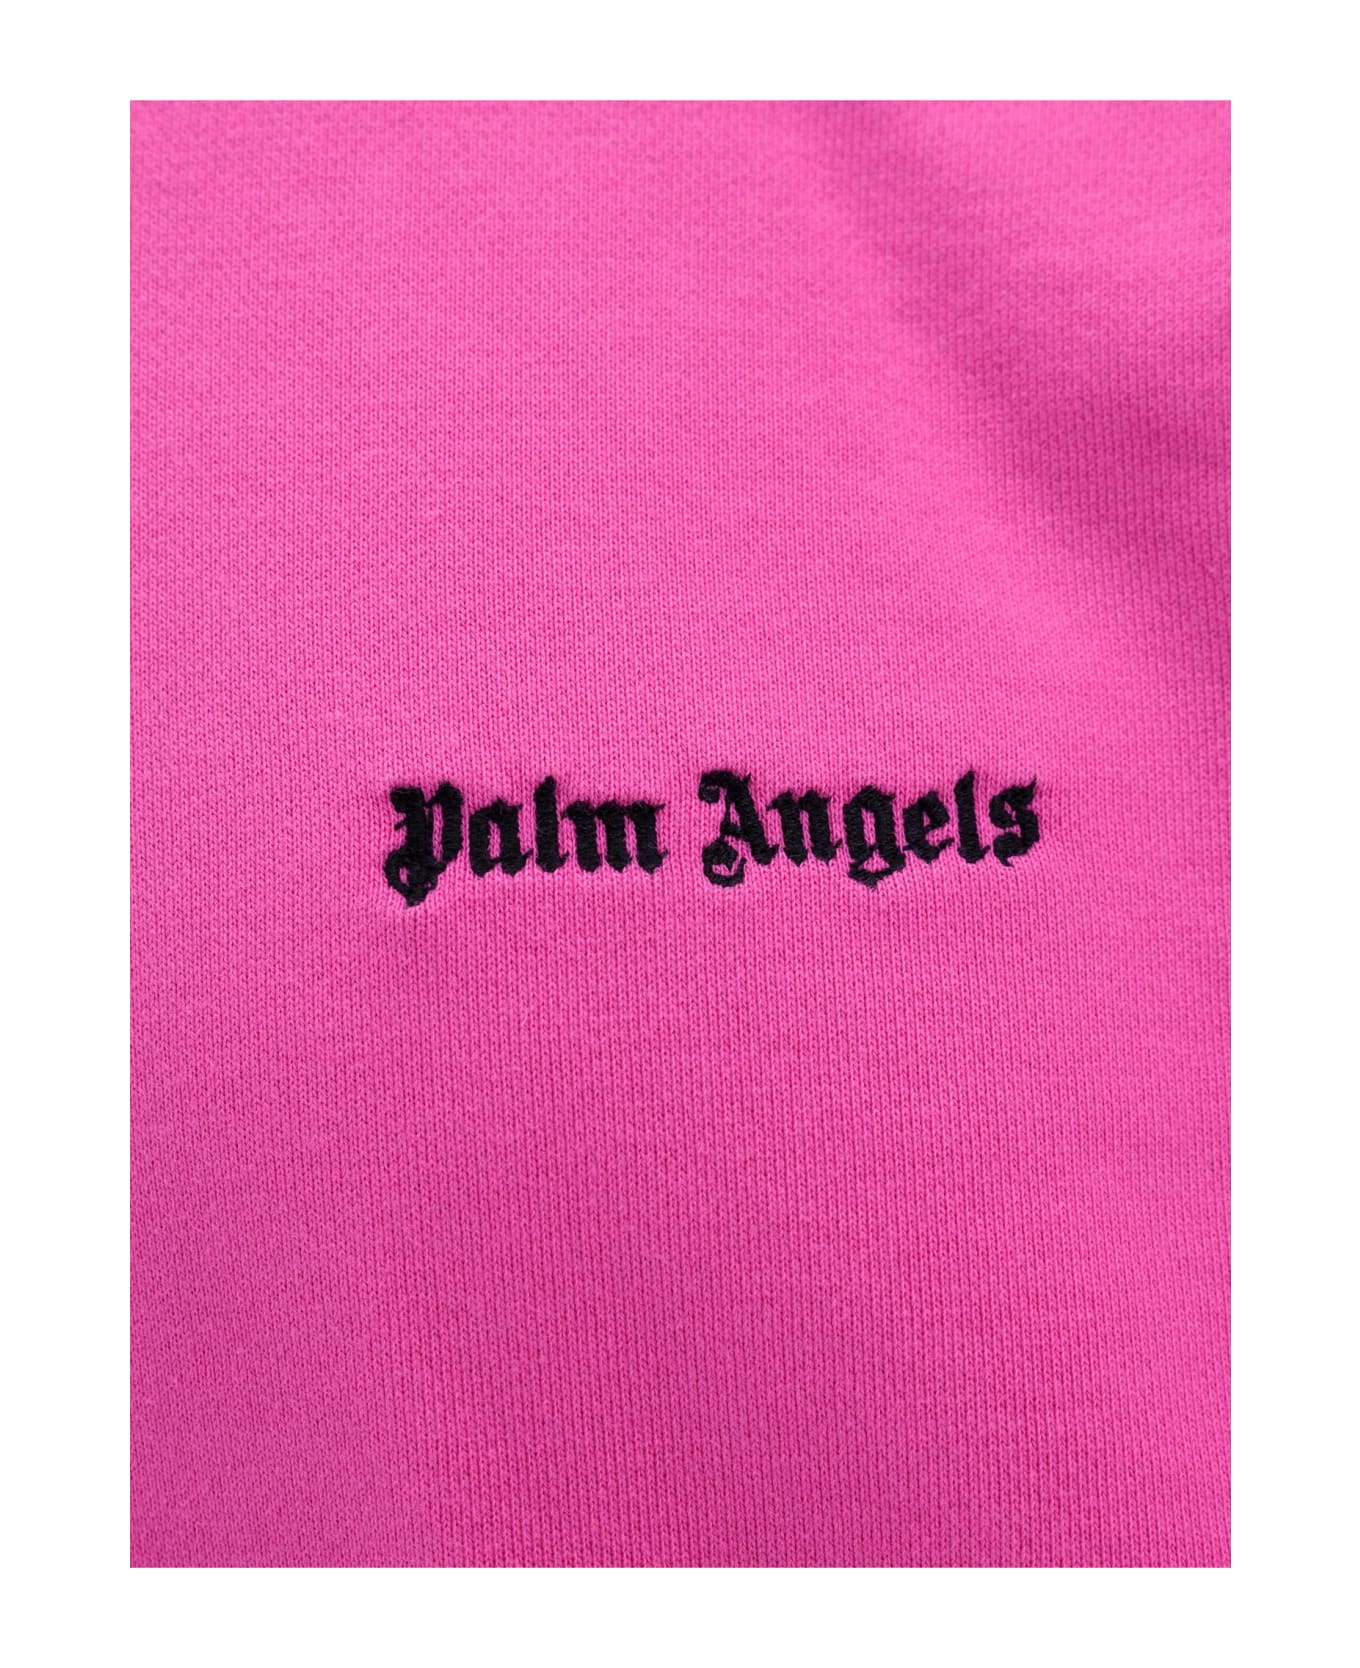 Palm Angels Cotton Sweatshirt With Logo Embroidery - Pink フリース